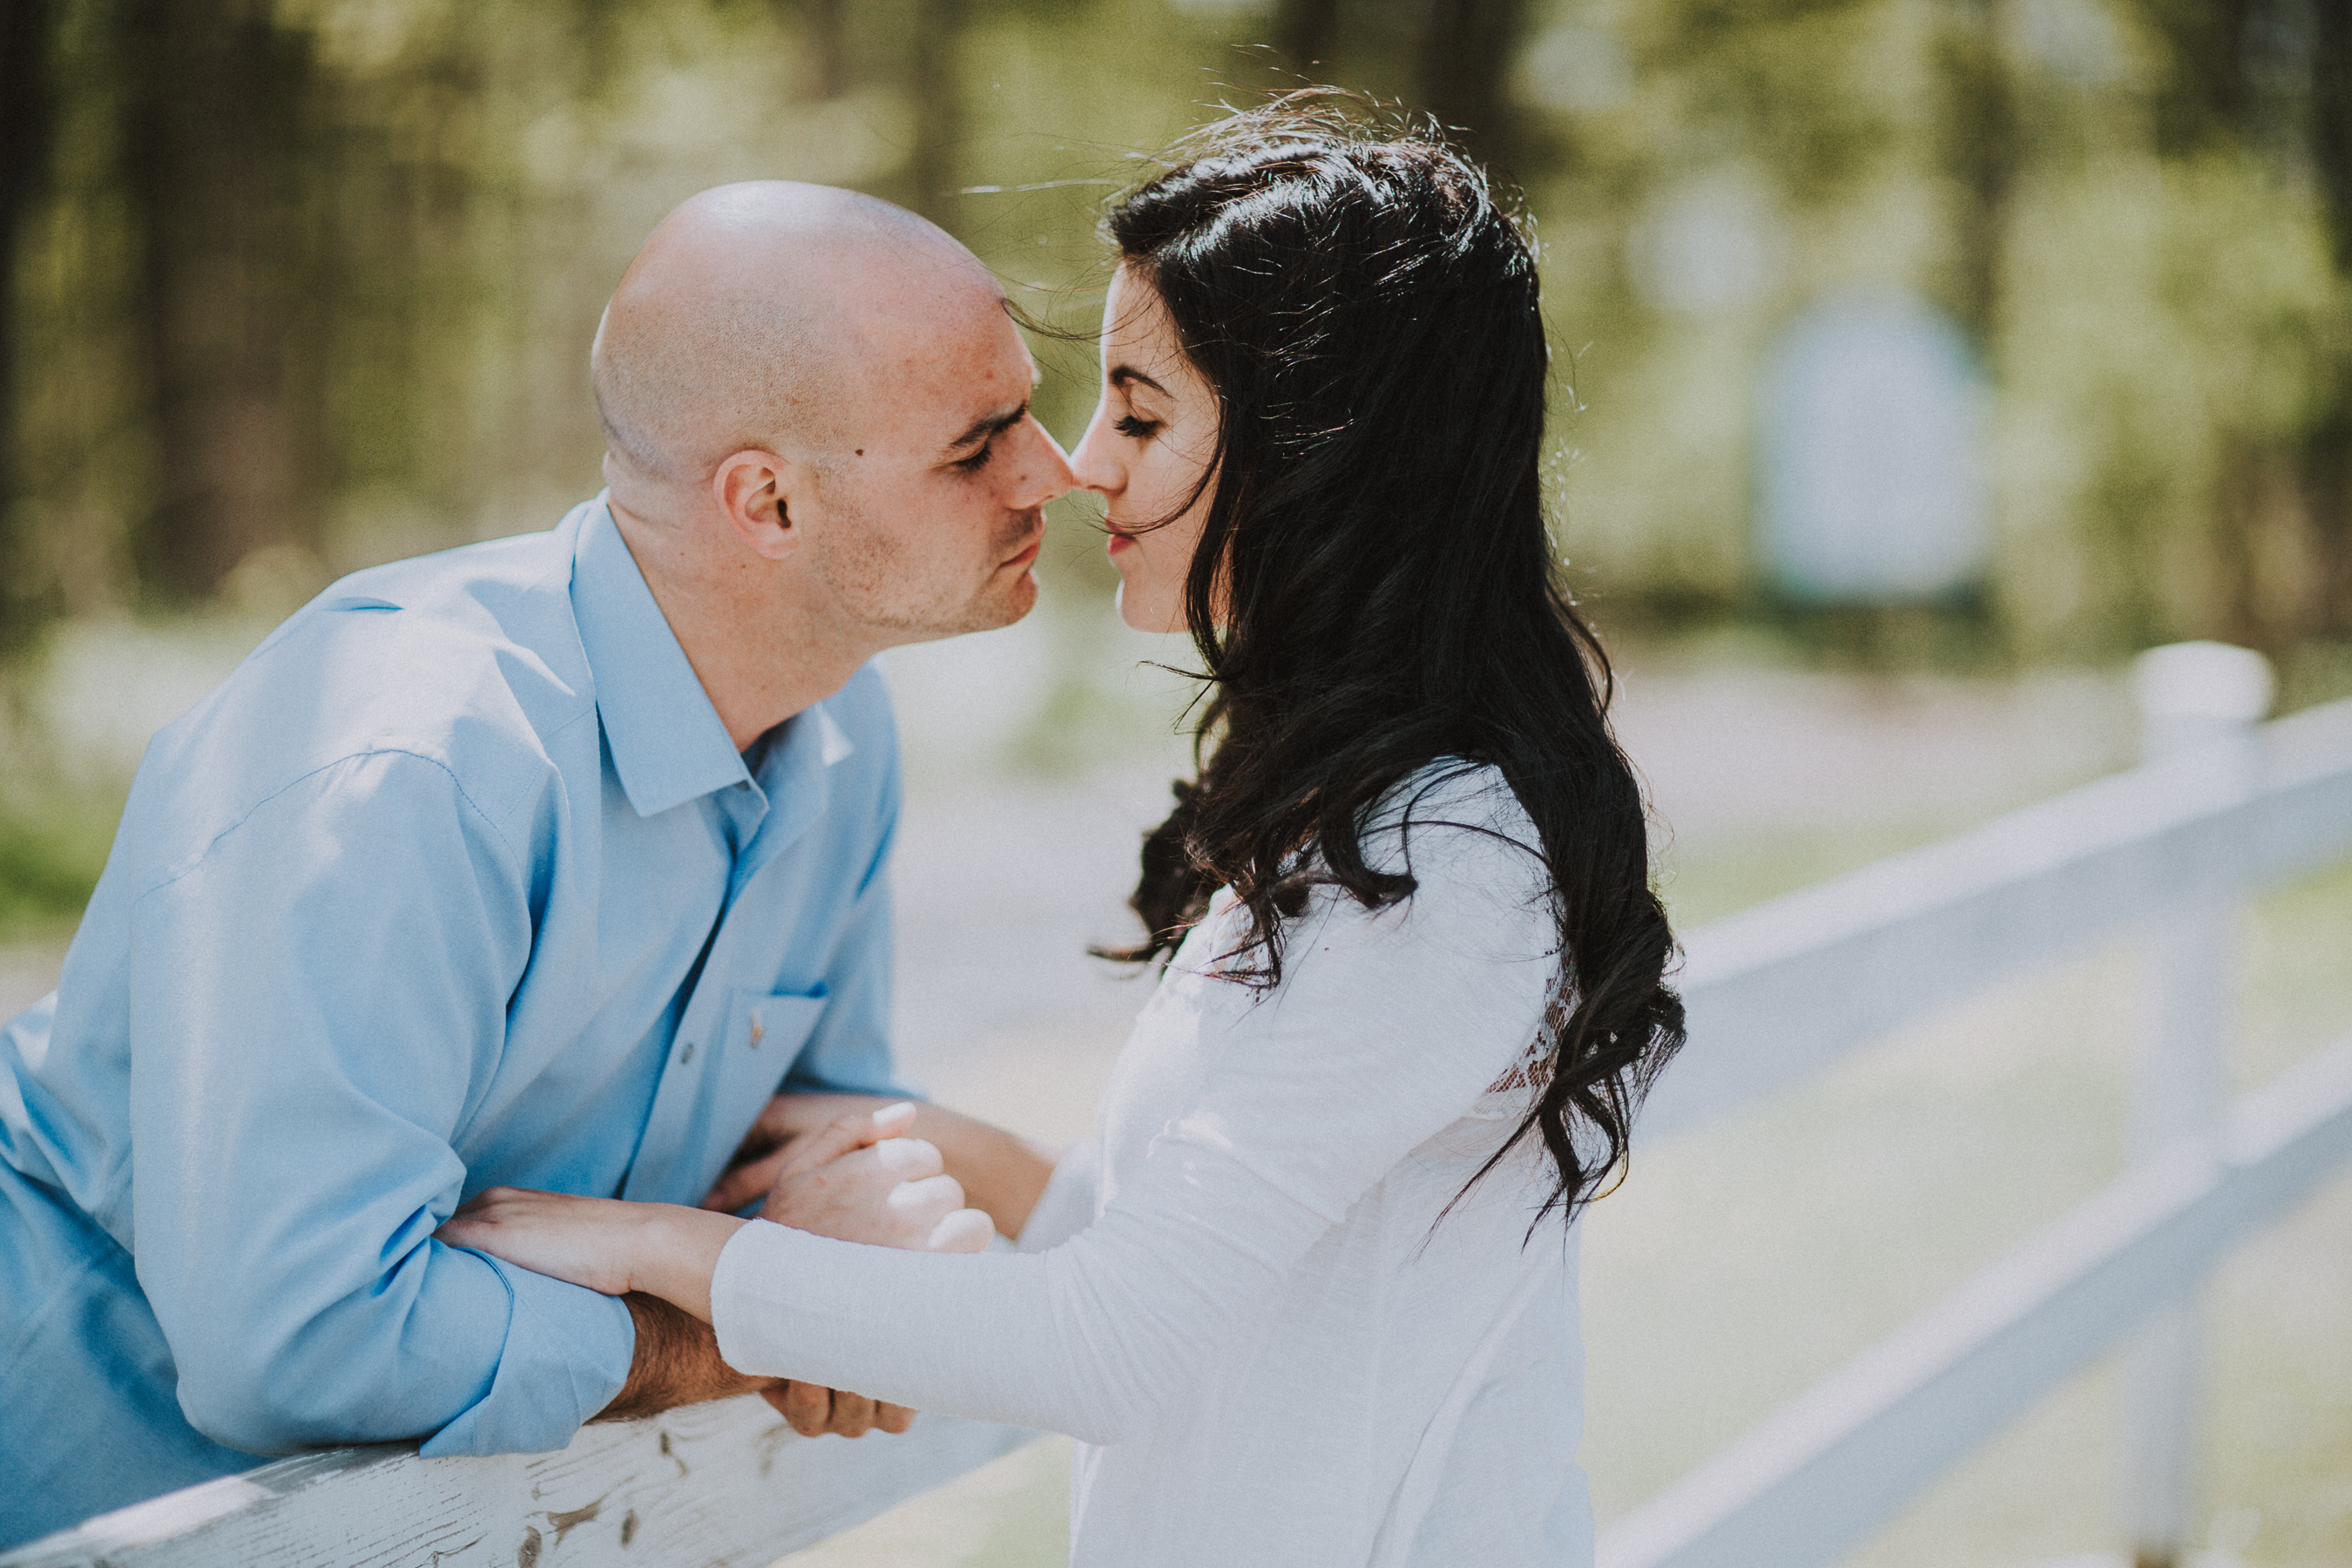 Vellore Town Hall Engagement Pictures by Toronto Wedding Photographer